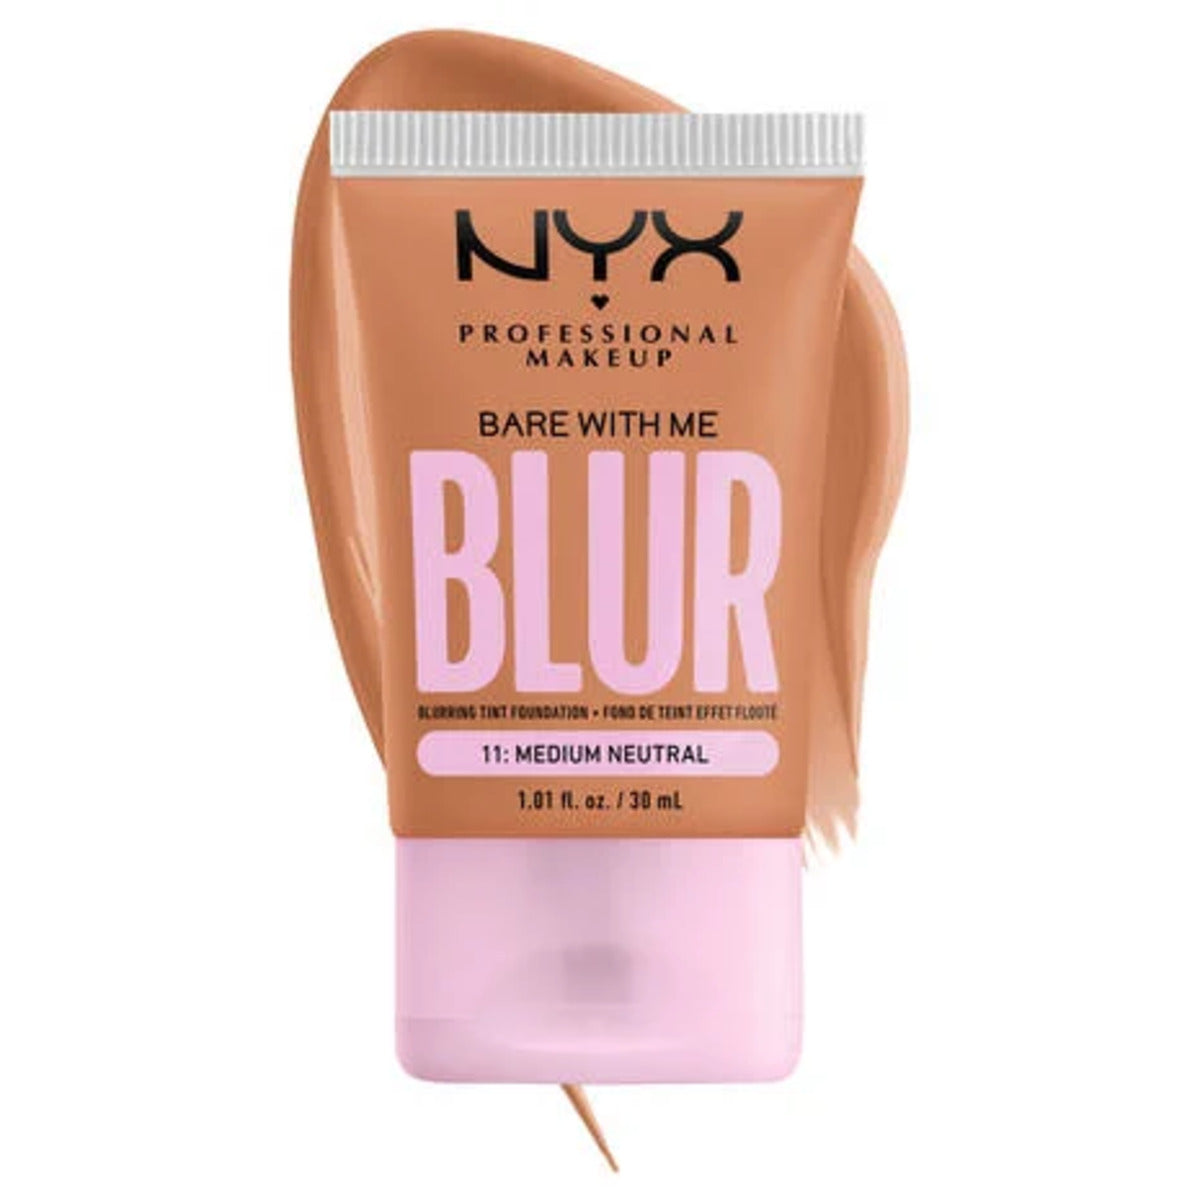 BASE DE MAQUILLAJE BARE WITH ME BLUR TINT - NYX